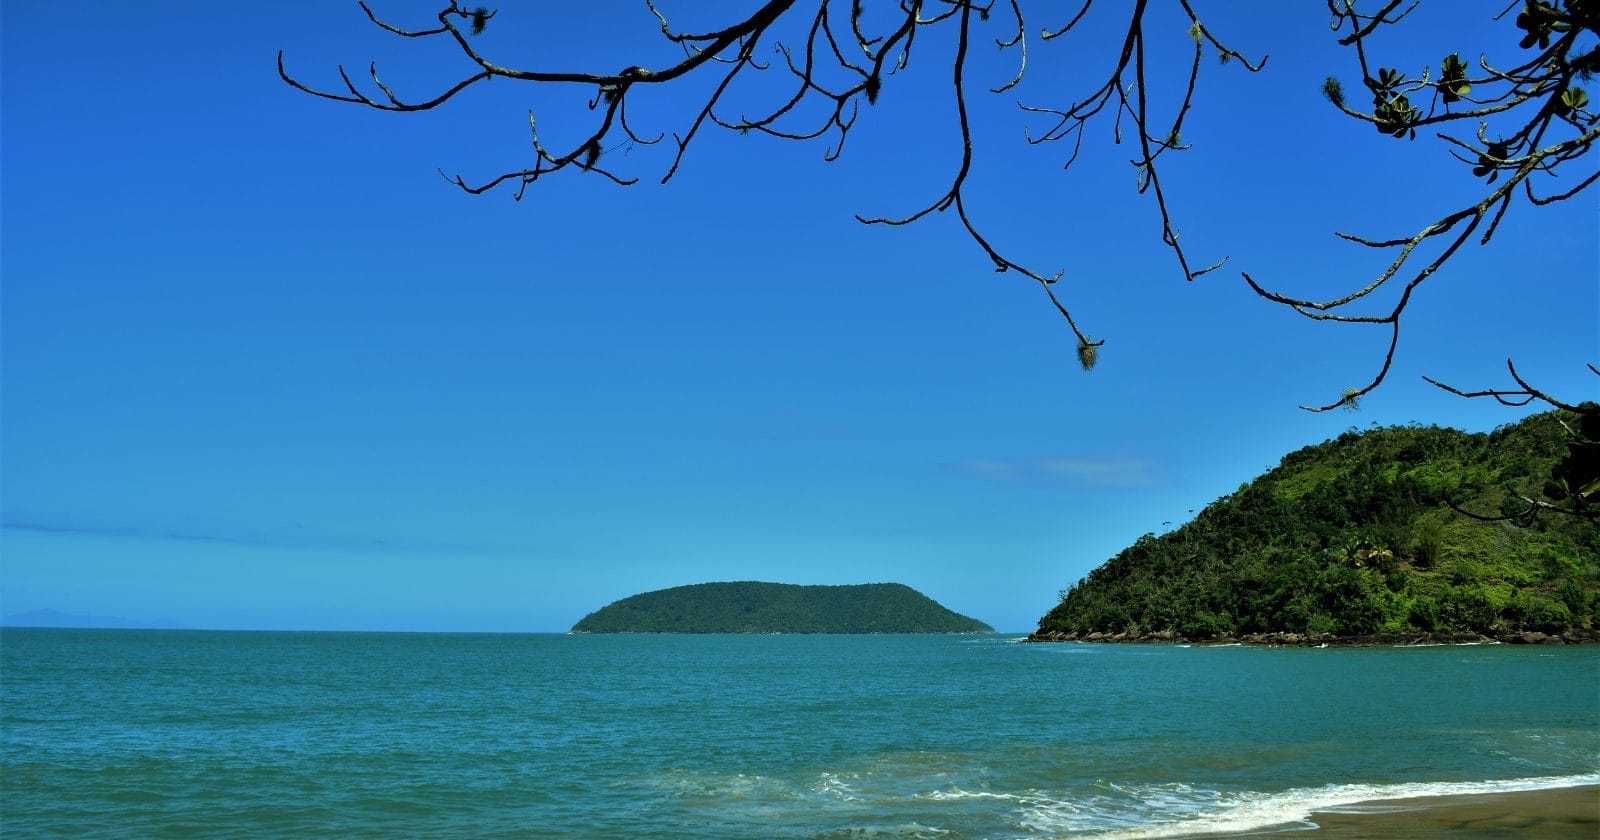 How To Get From Rio to Ilha Grande? Find Out Here!